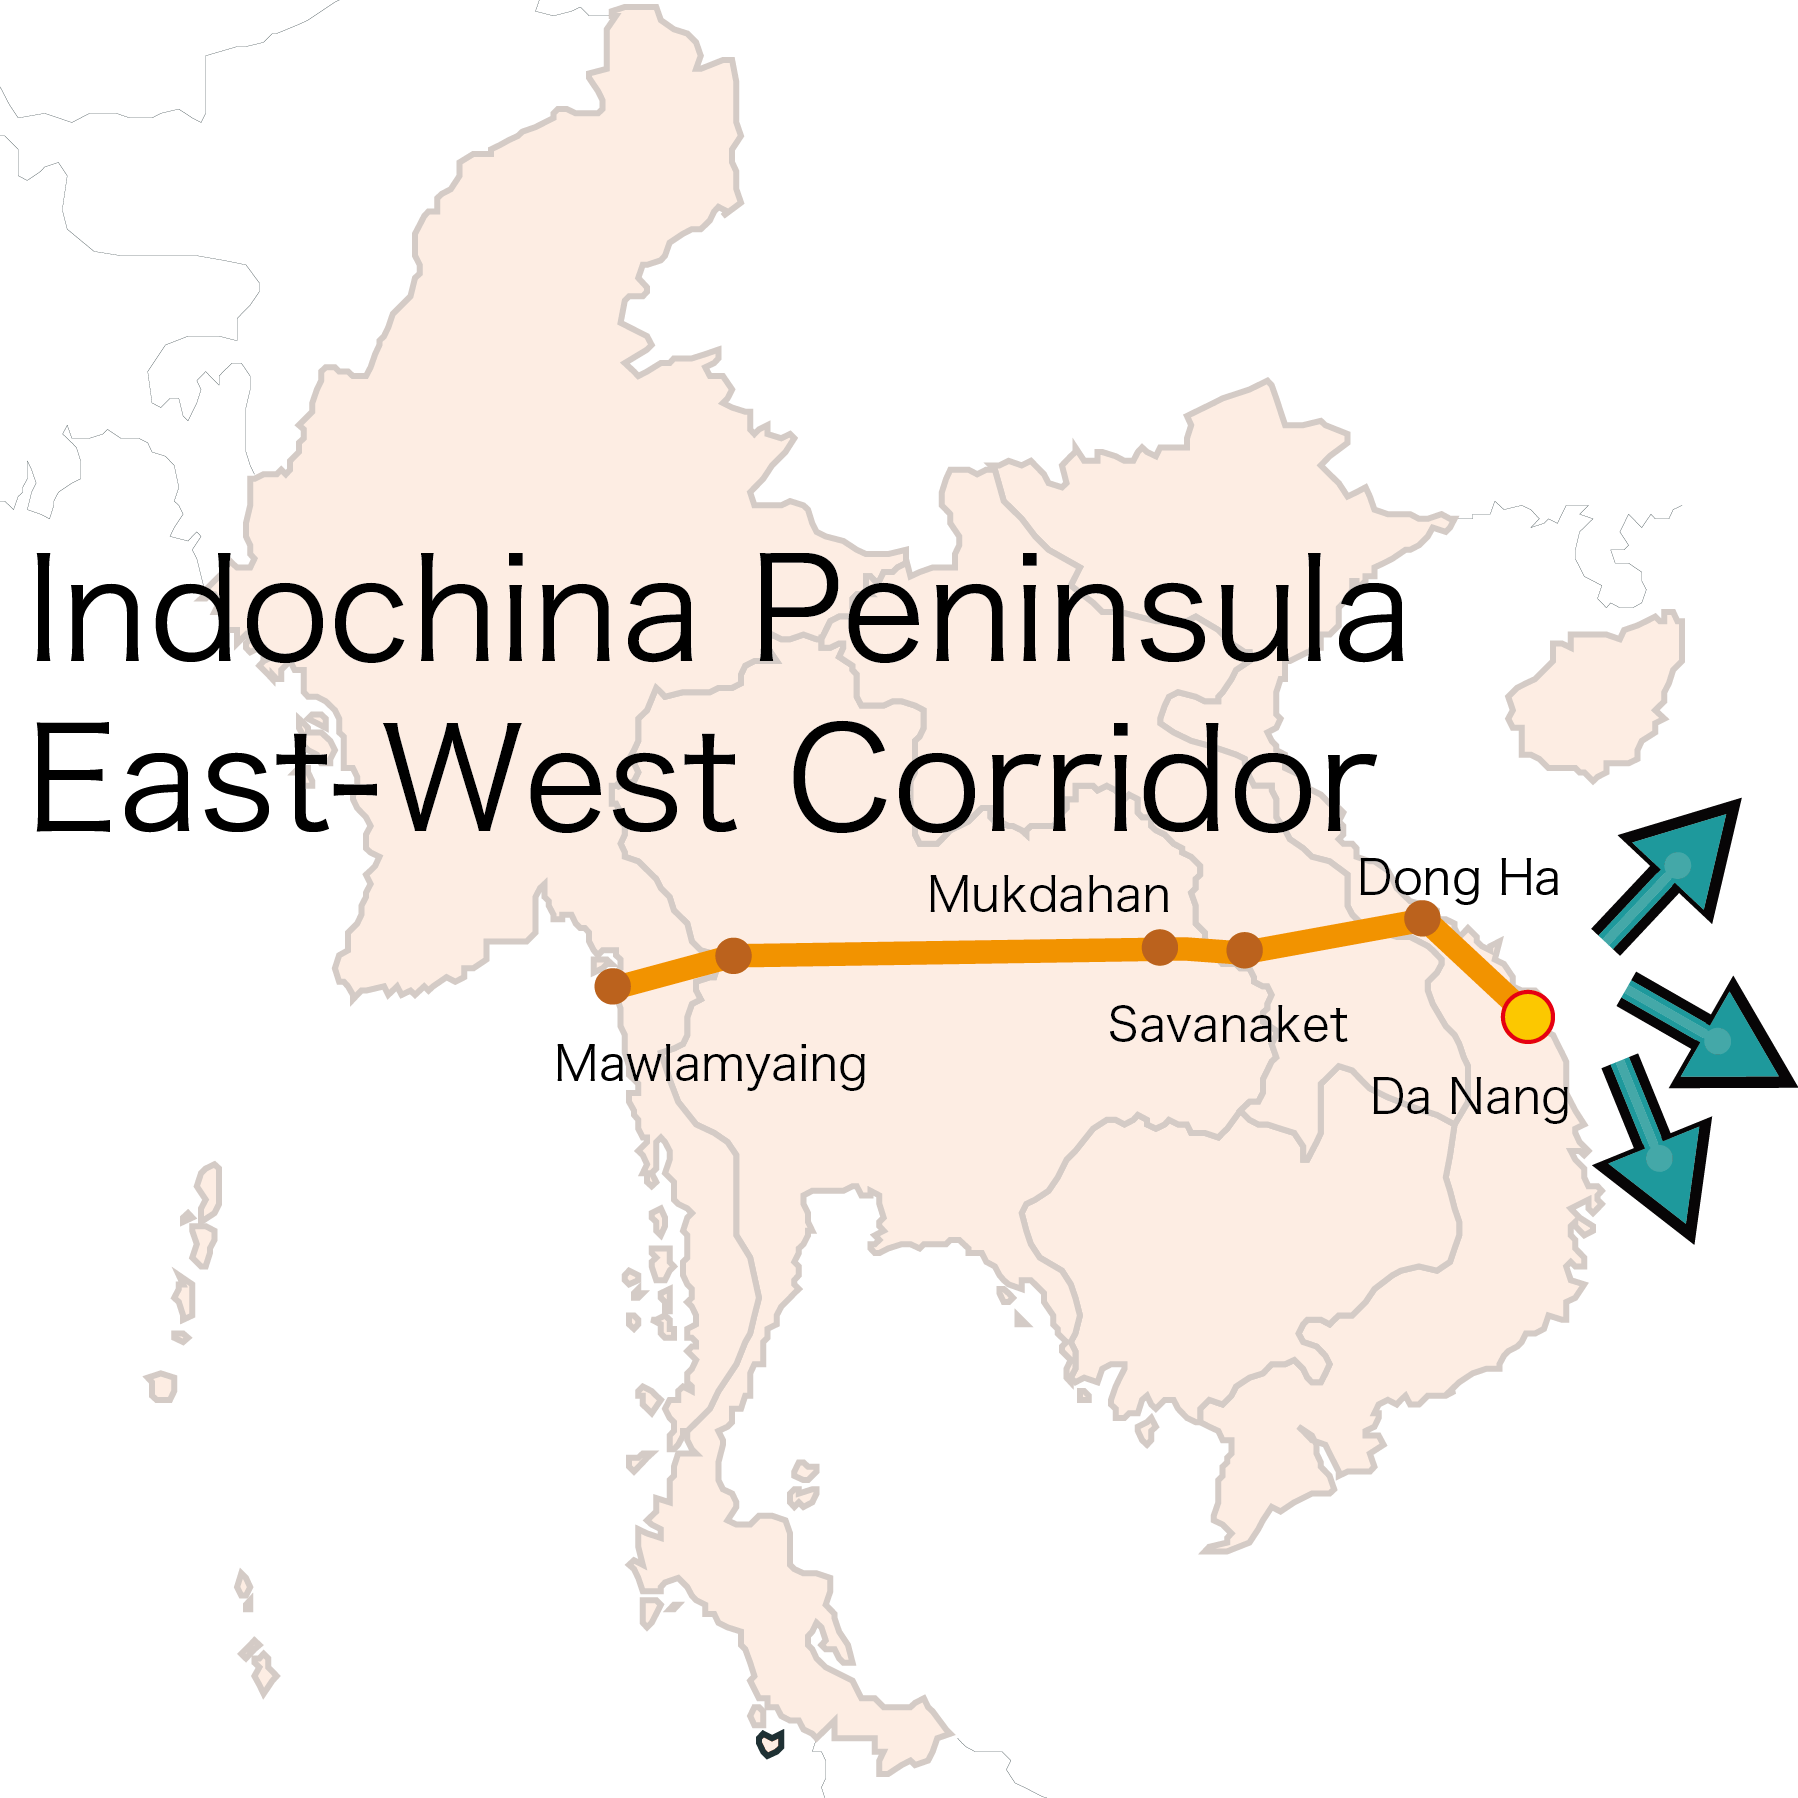 East-West Economic Corridor that crosses the central part of the Indochina. We are increasing land connectivity in ASEAN countries.